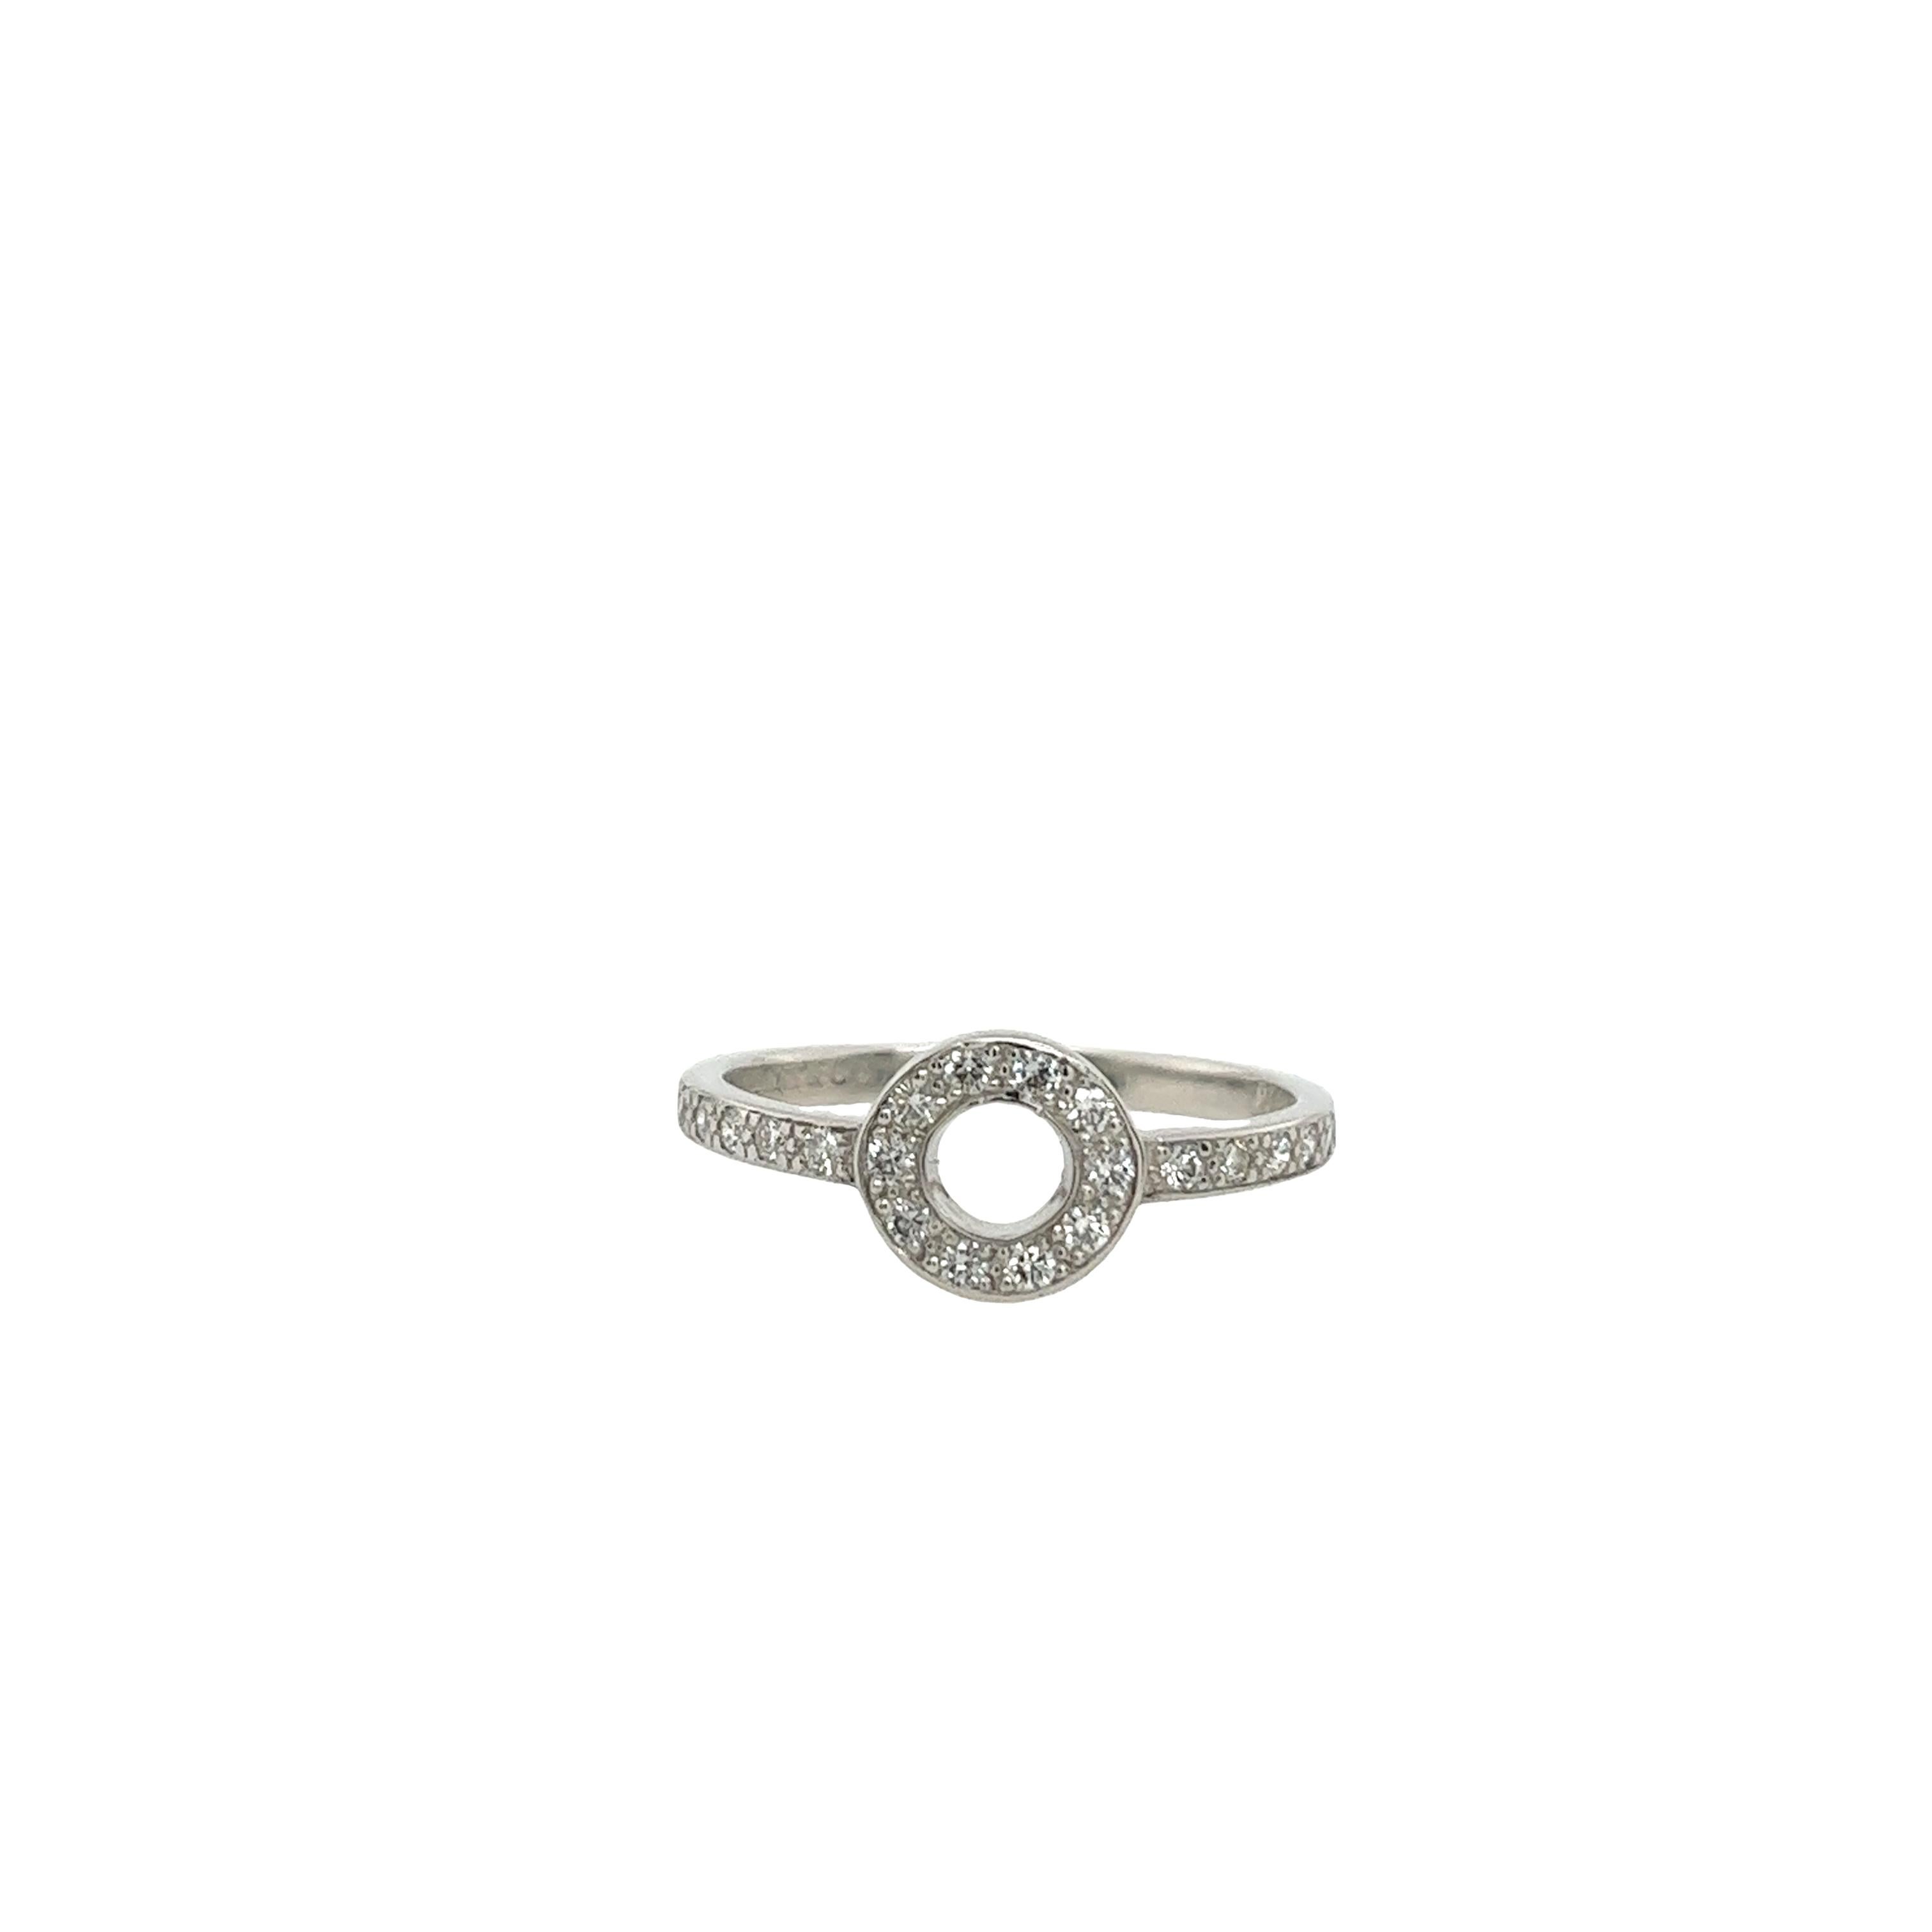 The Tiffany & Co. Diamond Platinum Band Open Circle Ring is a stunning piece with timeless elegance. 
This ring features an open circle design crafted from platinum, symbolizing unity and eternity. The circle is adorned with diamonds, adding sparkle